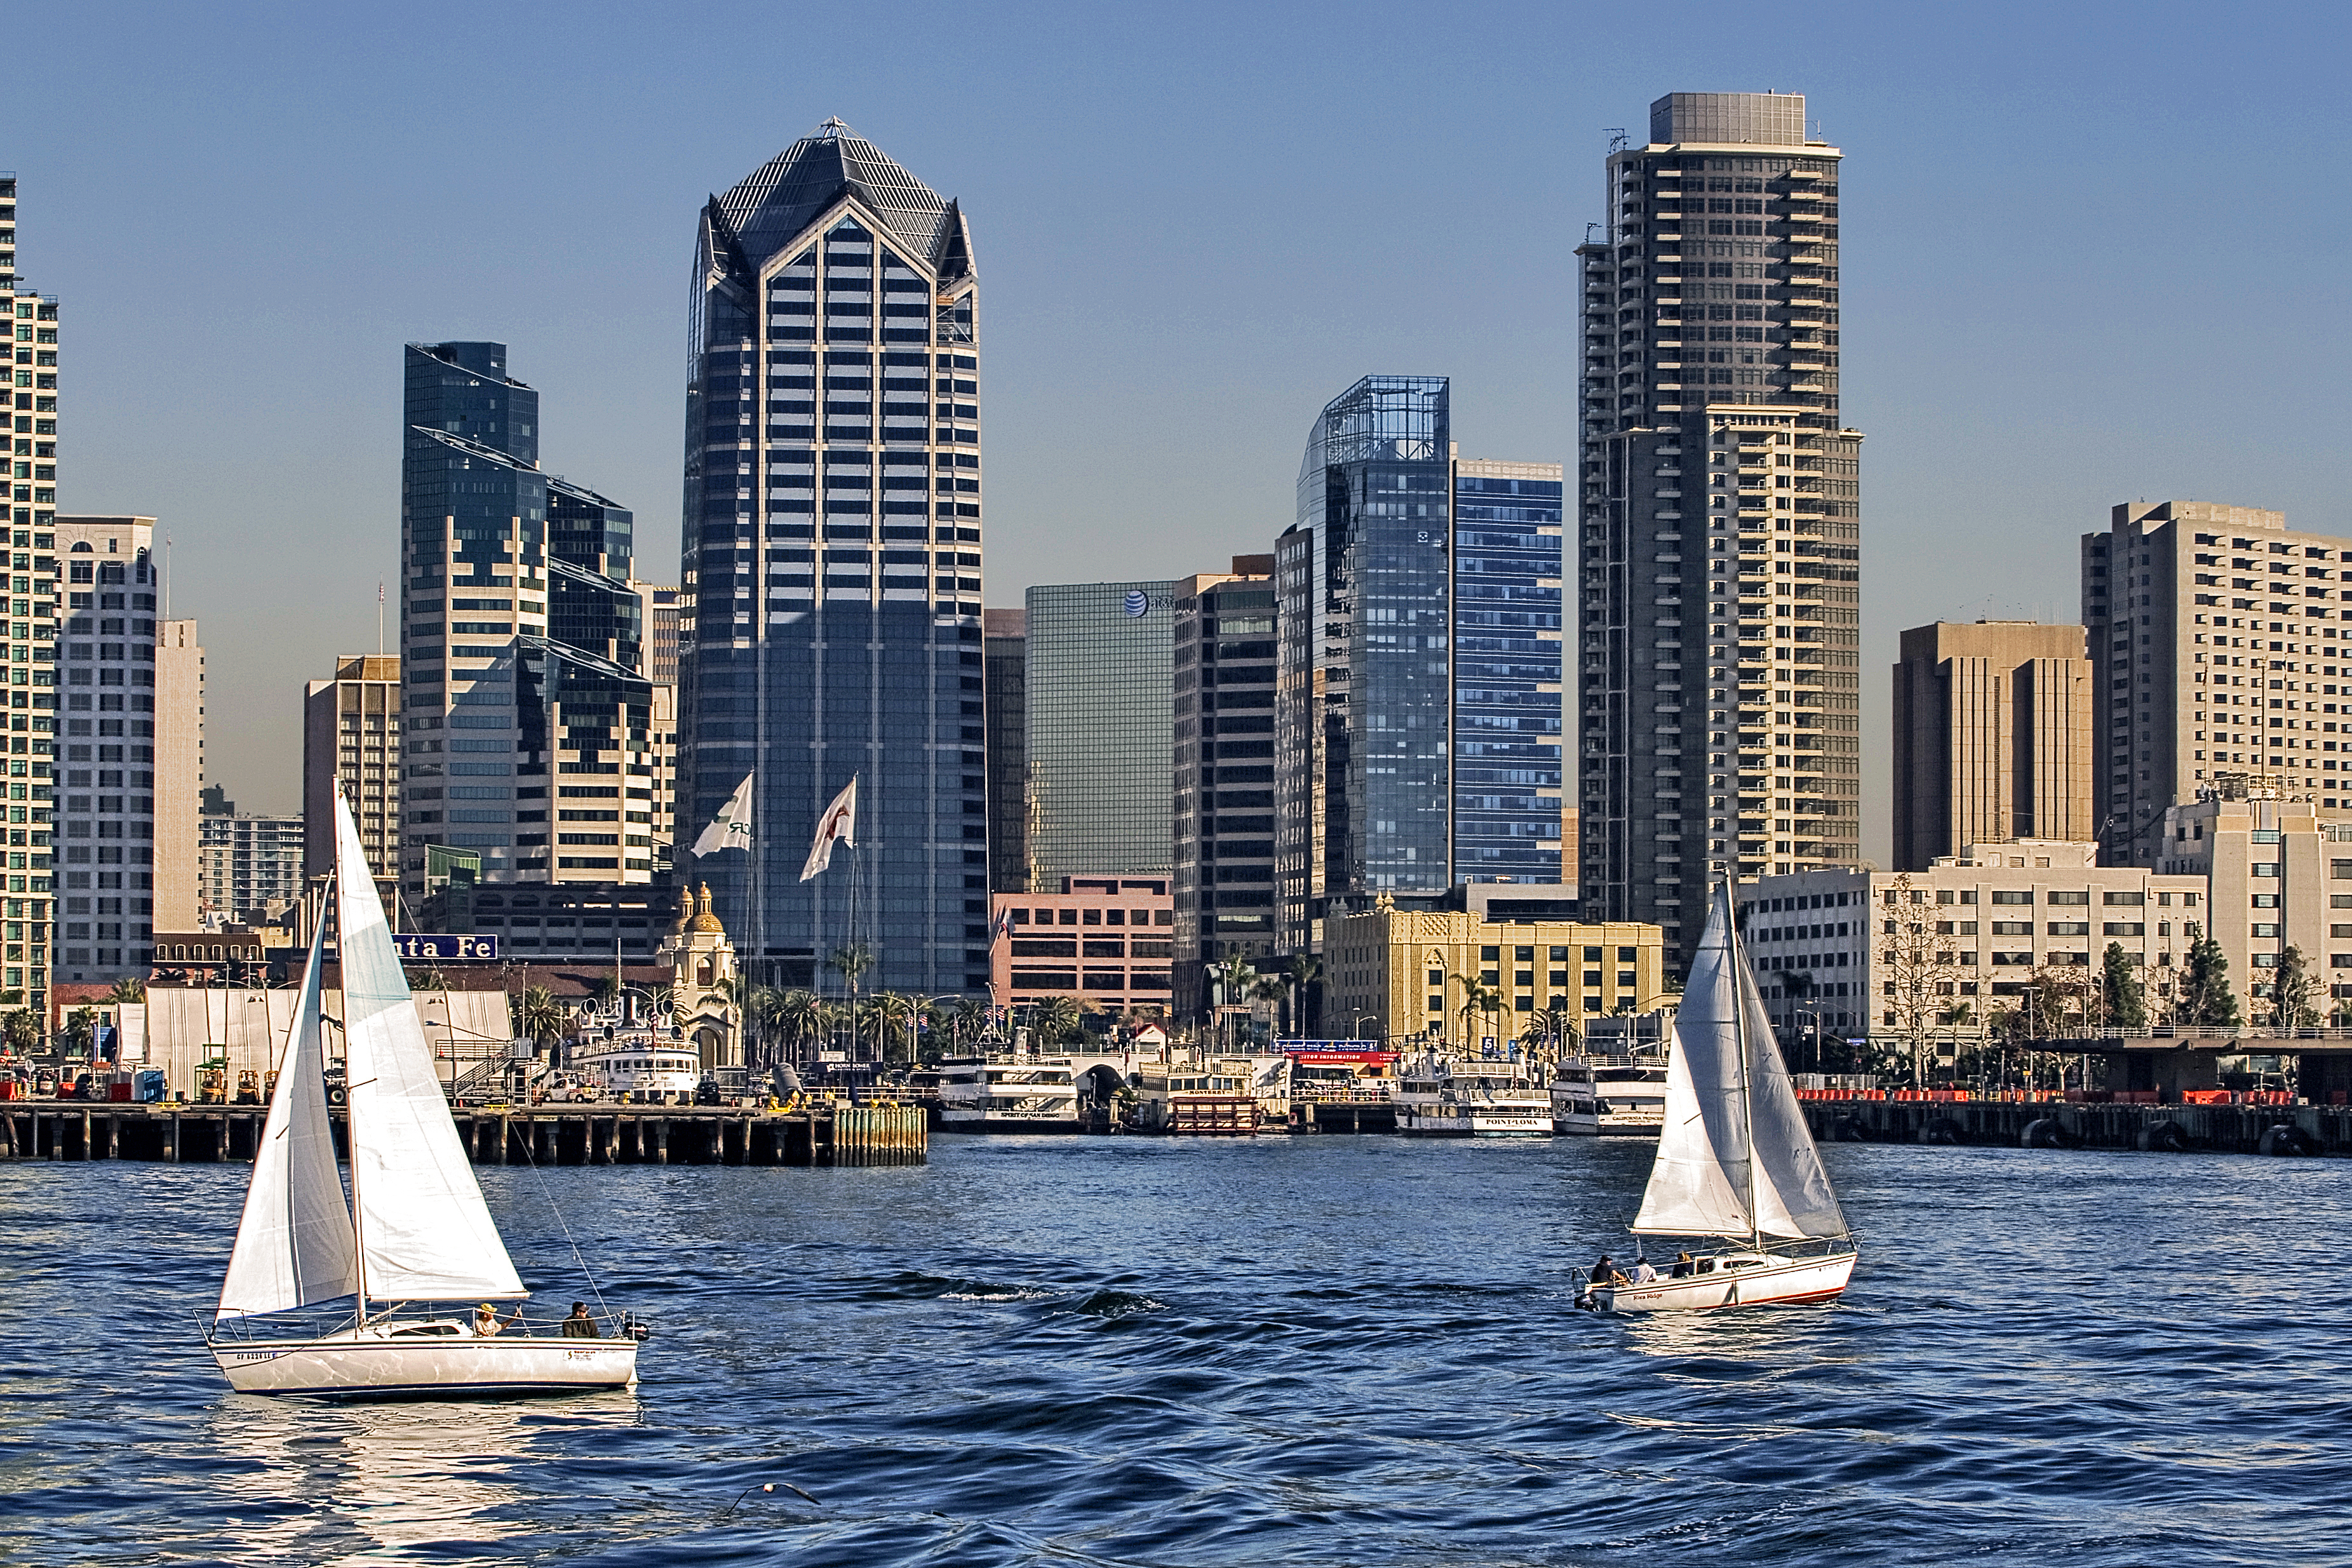 Sailboats in a harbor with a backdrop of a city skyline, depicting a travel destination